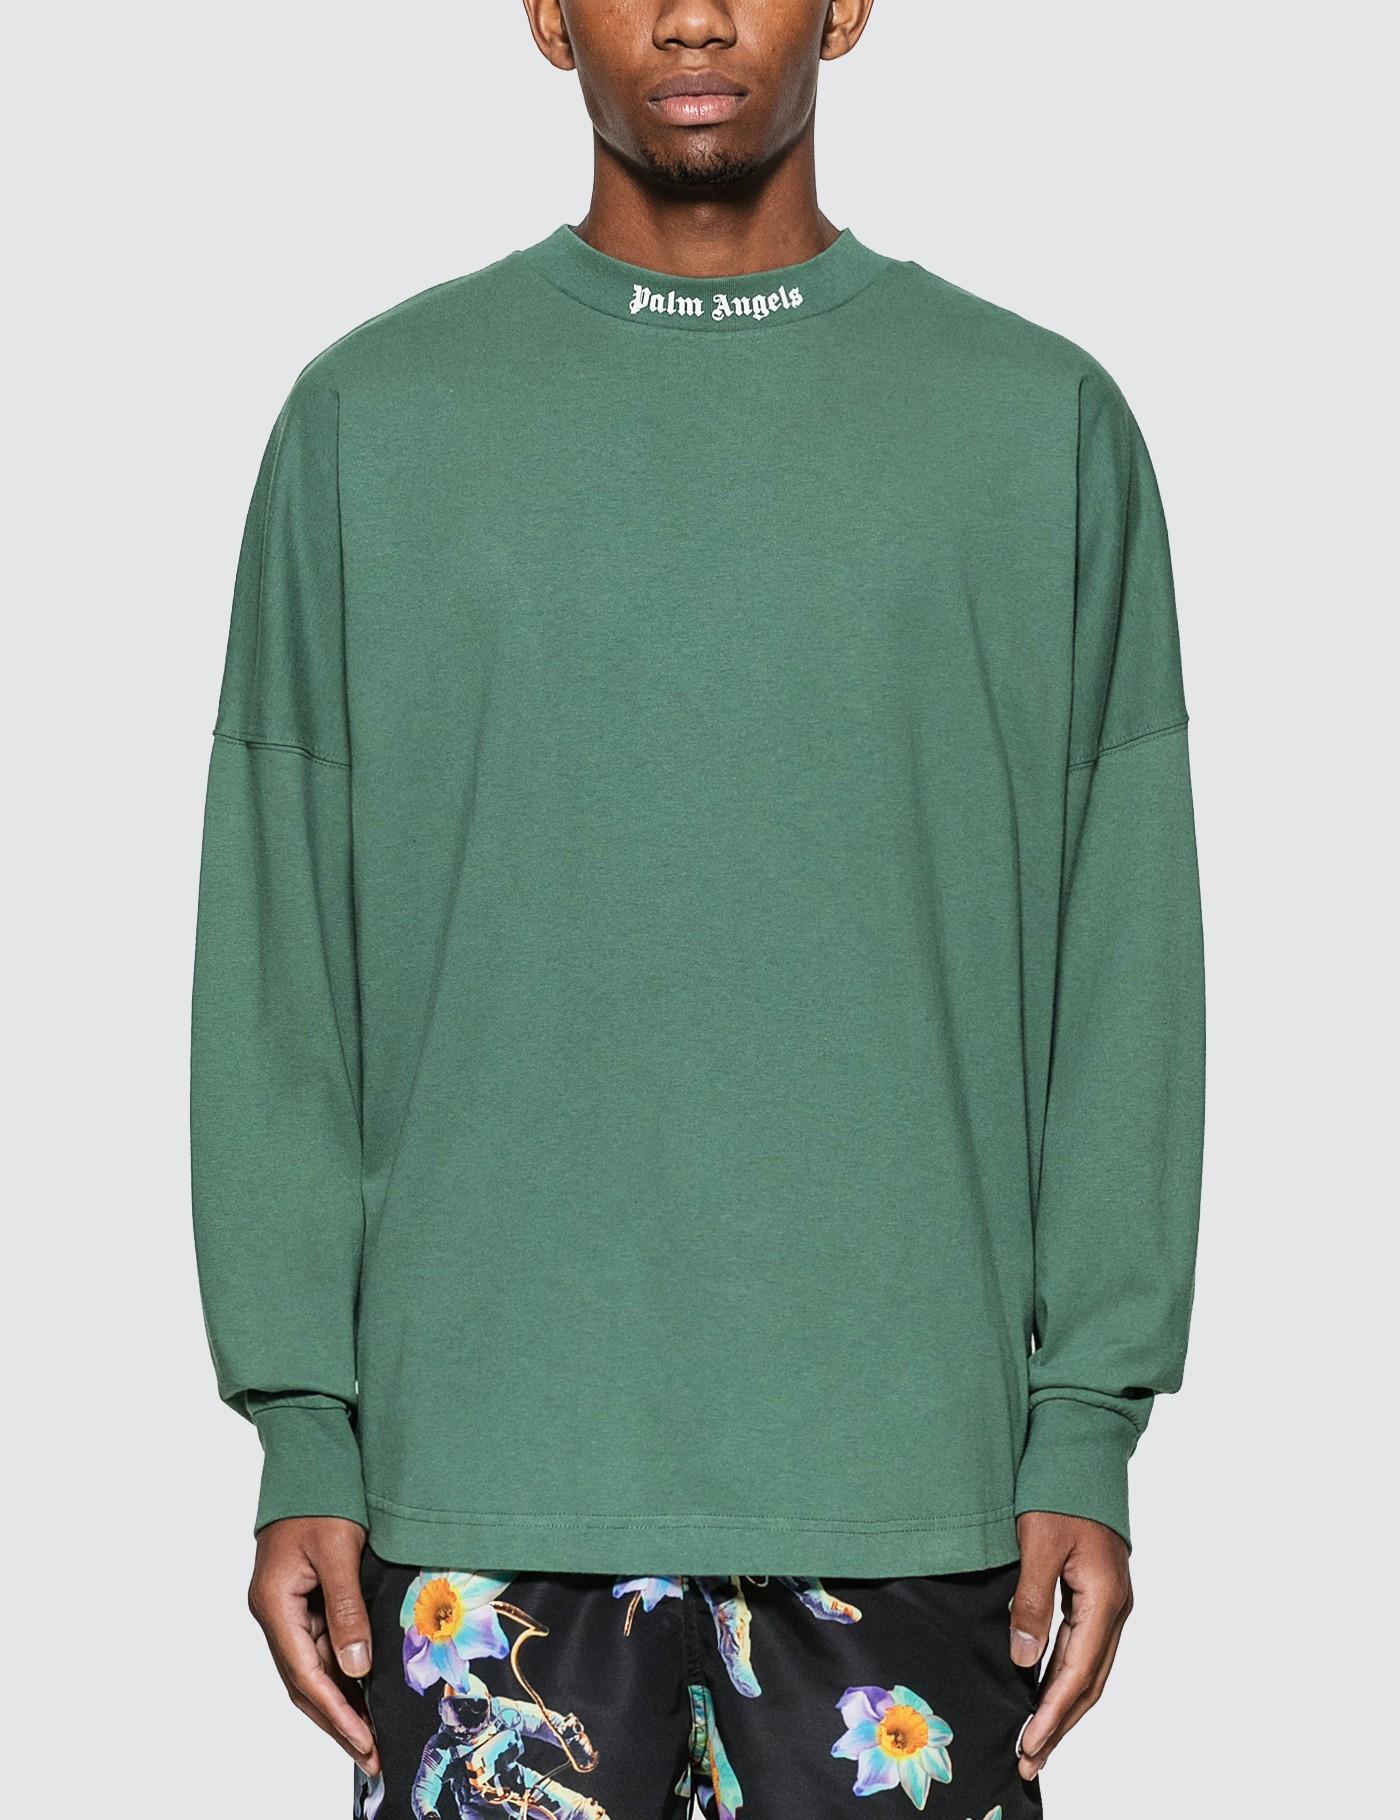 Palm Angels Classic Logo Over Long Sleeve T-shirt in Green for Men - Lyst